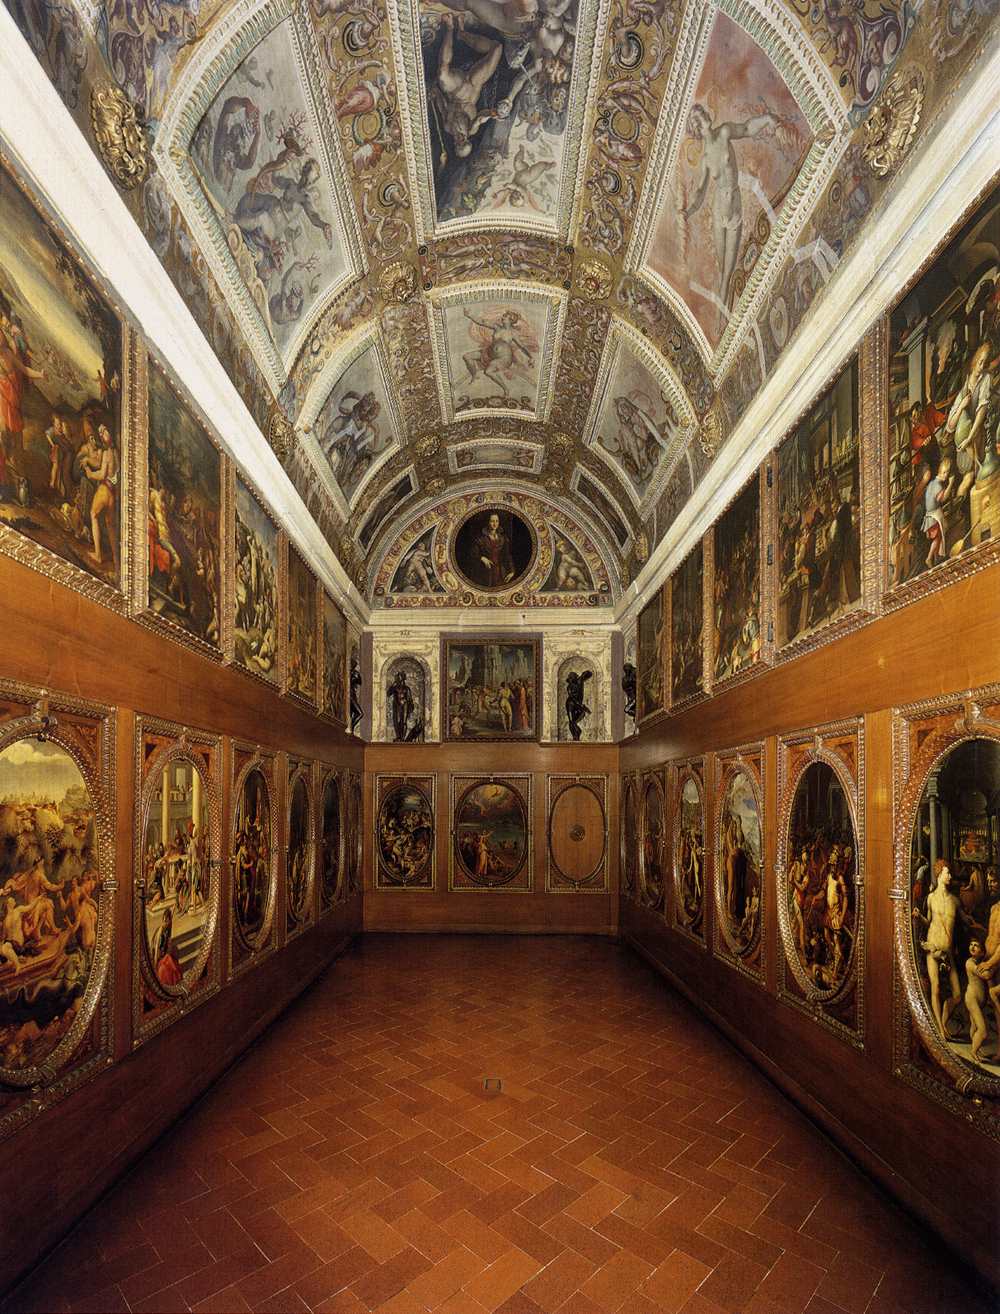 The Studiolo, Palazzo Vecchio, decorated by Vasari in oil on panel and slate